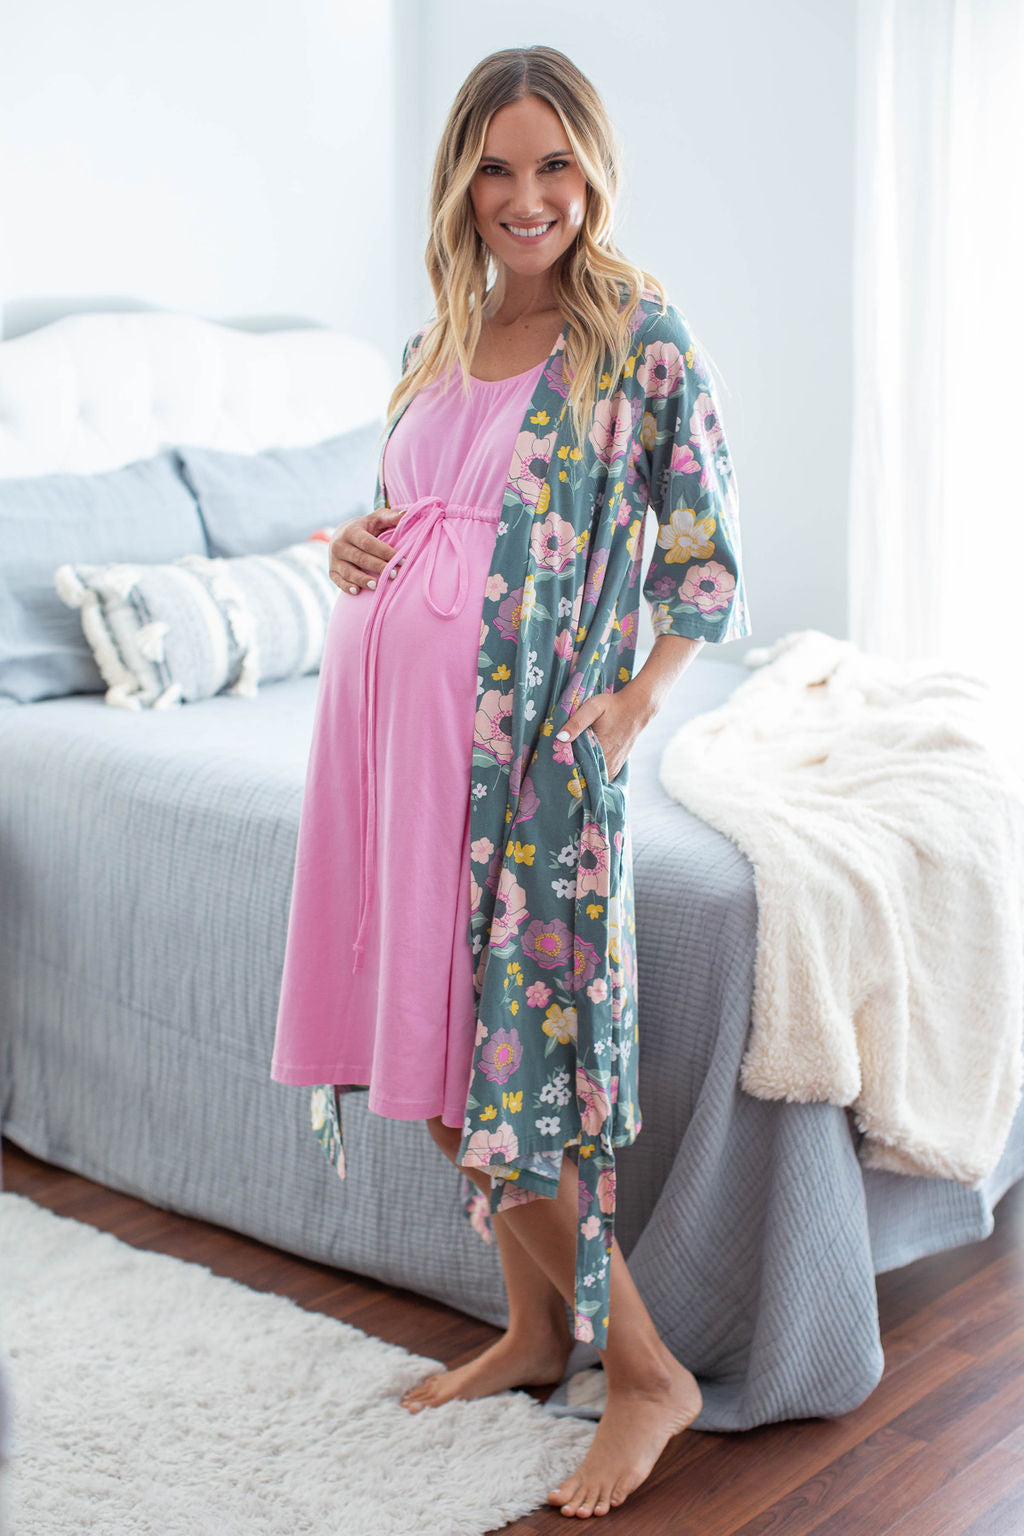 Charlotte Robe & Pink 3 in 1 Labor Gown